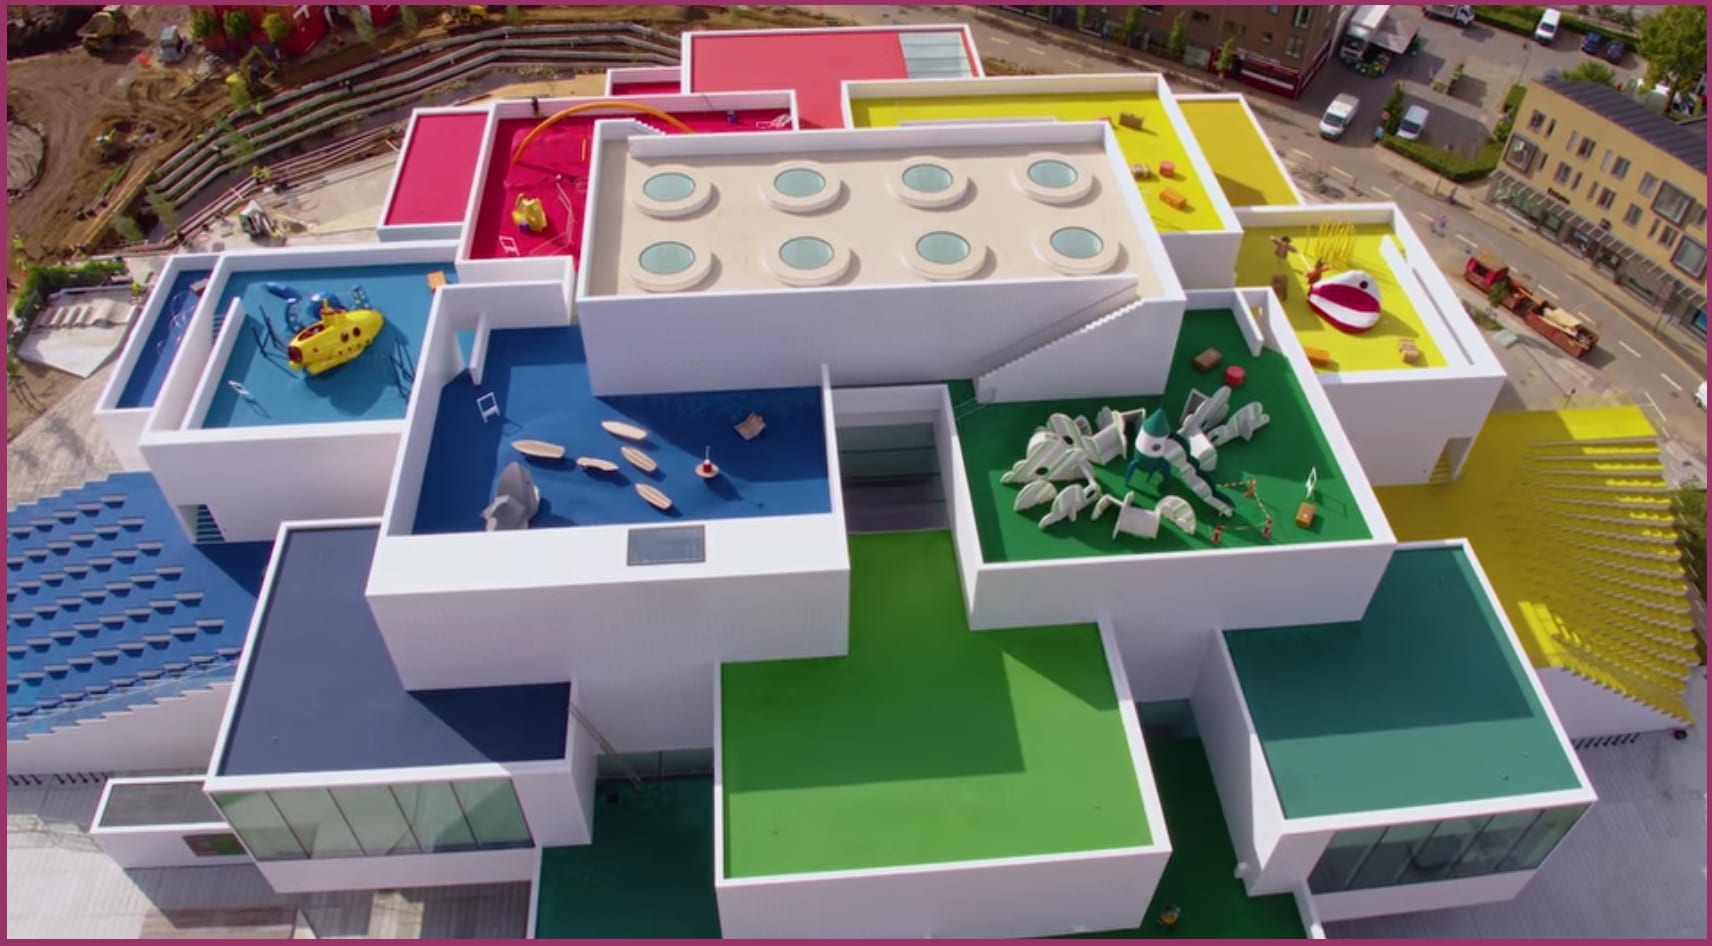 Lego House - Home of the Brick